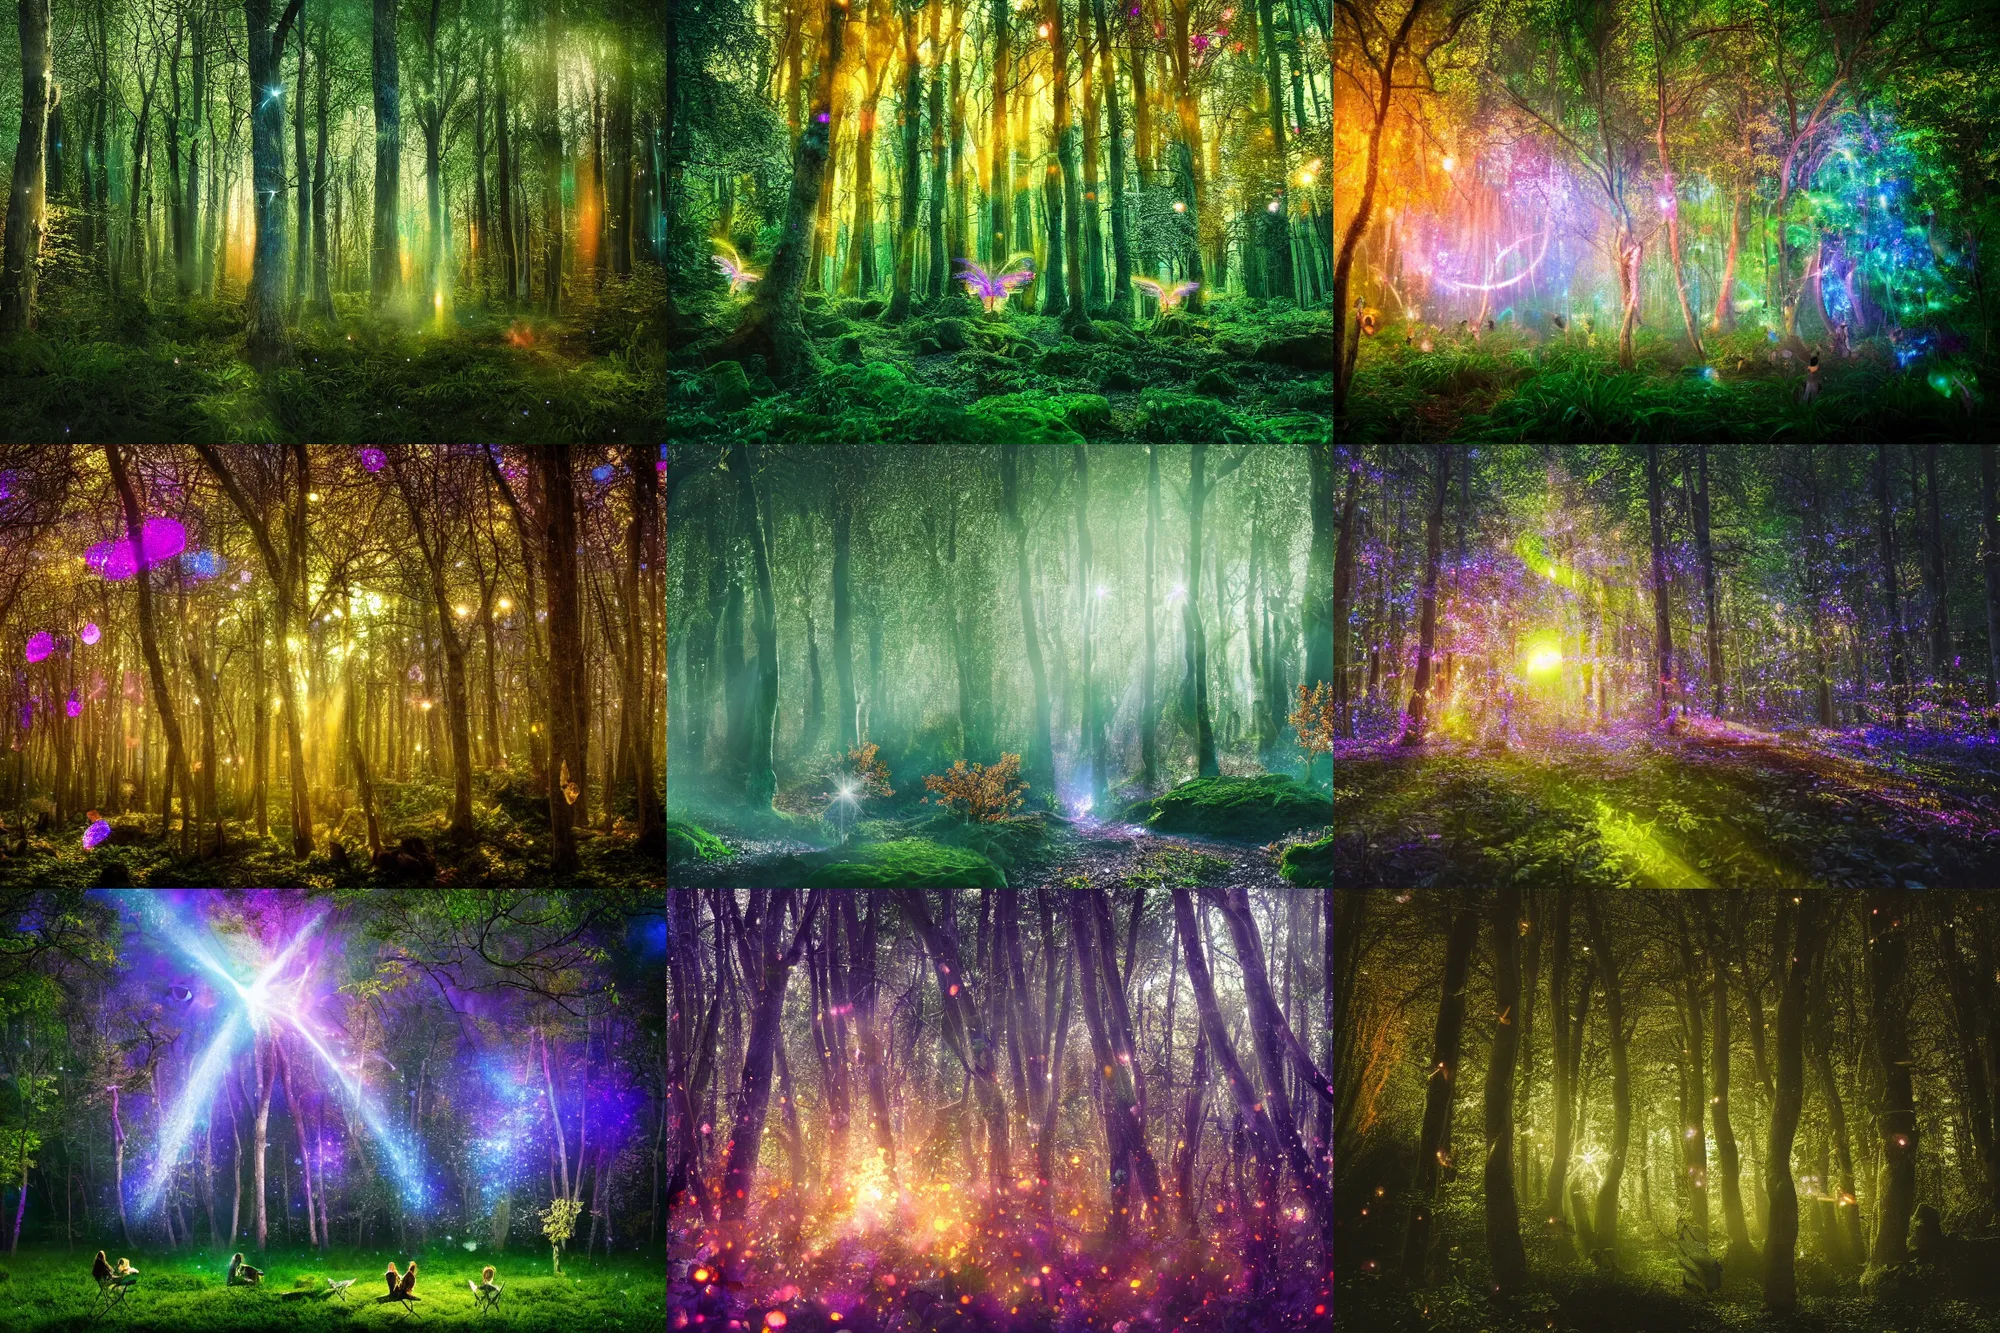 Prompt: photo of a beautiful magical fantasy forest, glowing tiny winged fairies flying throughout leaving sparkling time-lapse glowing trails in the air, sunlight filtering through the trees, dense, verdant, tranquil, surrounded by beautiful iridescent sparkling bushes, stunning sparkling opalescent trees, 35mm photo, award-winning magazine cover photo, nature photography, cinematic, dramatic, establishing shot